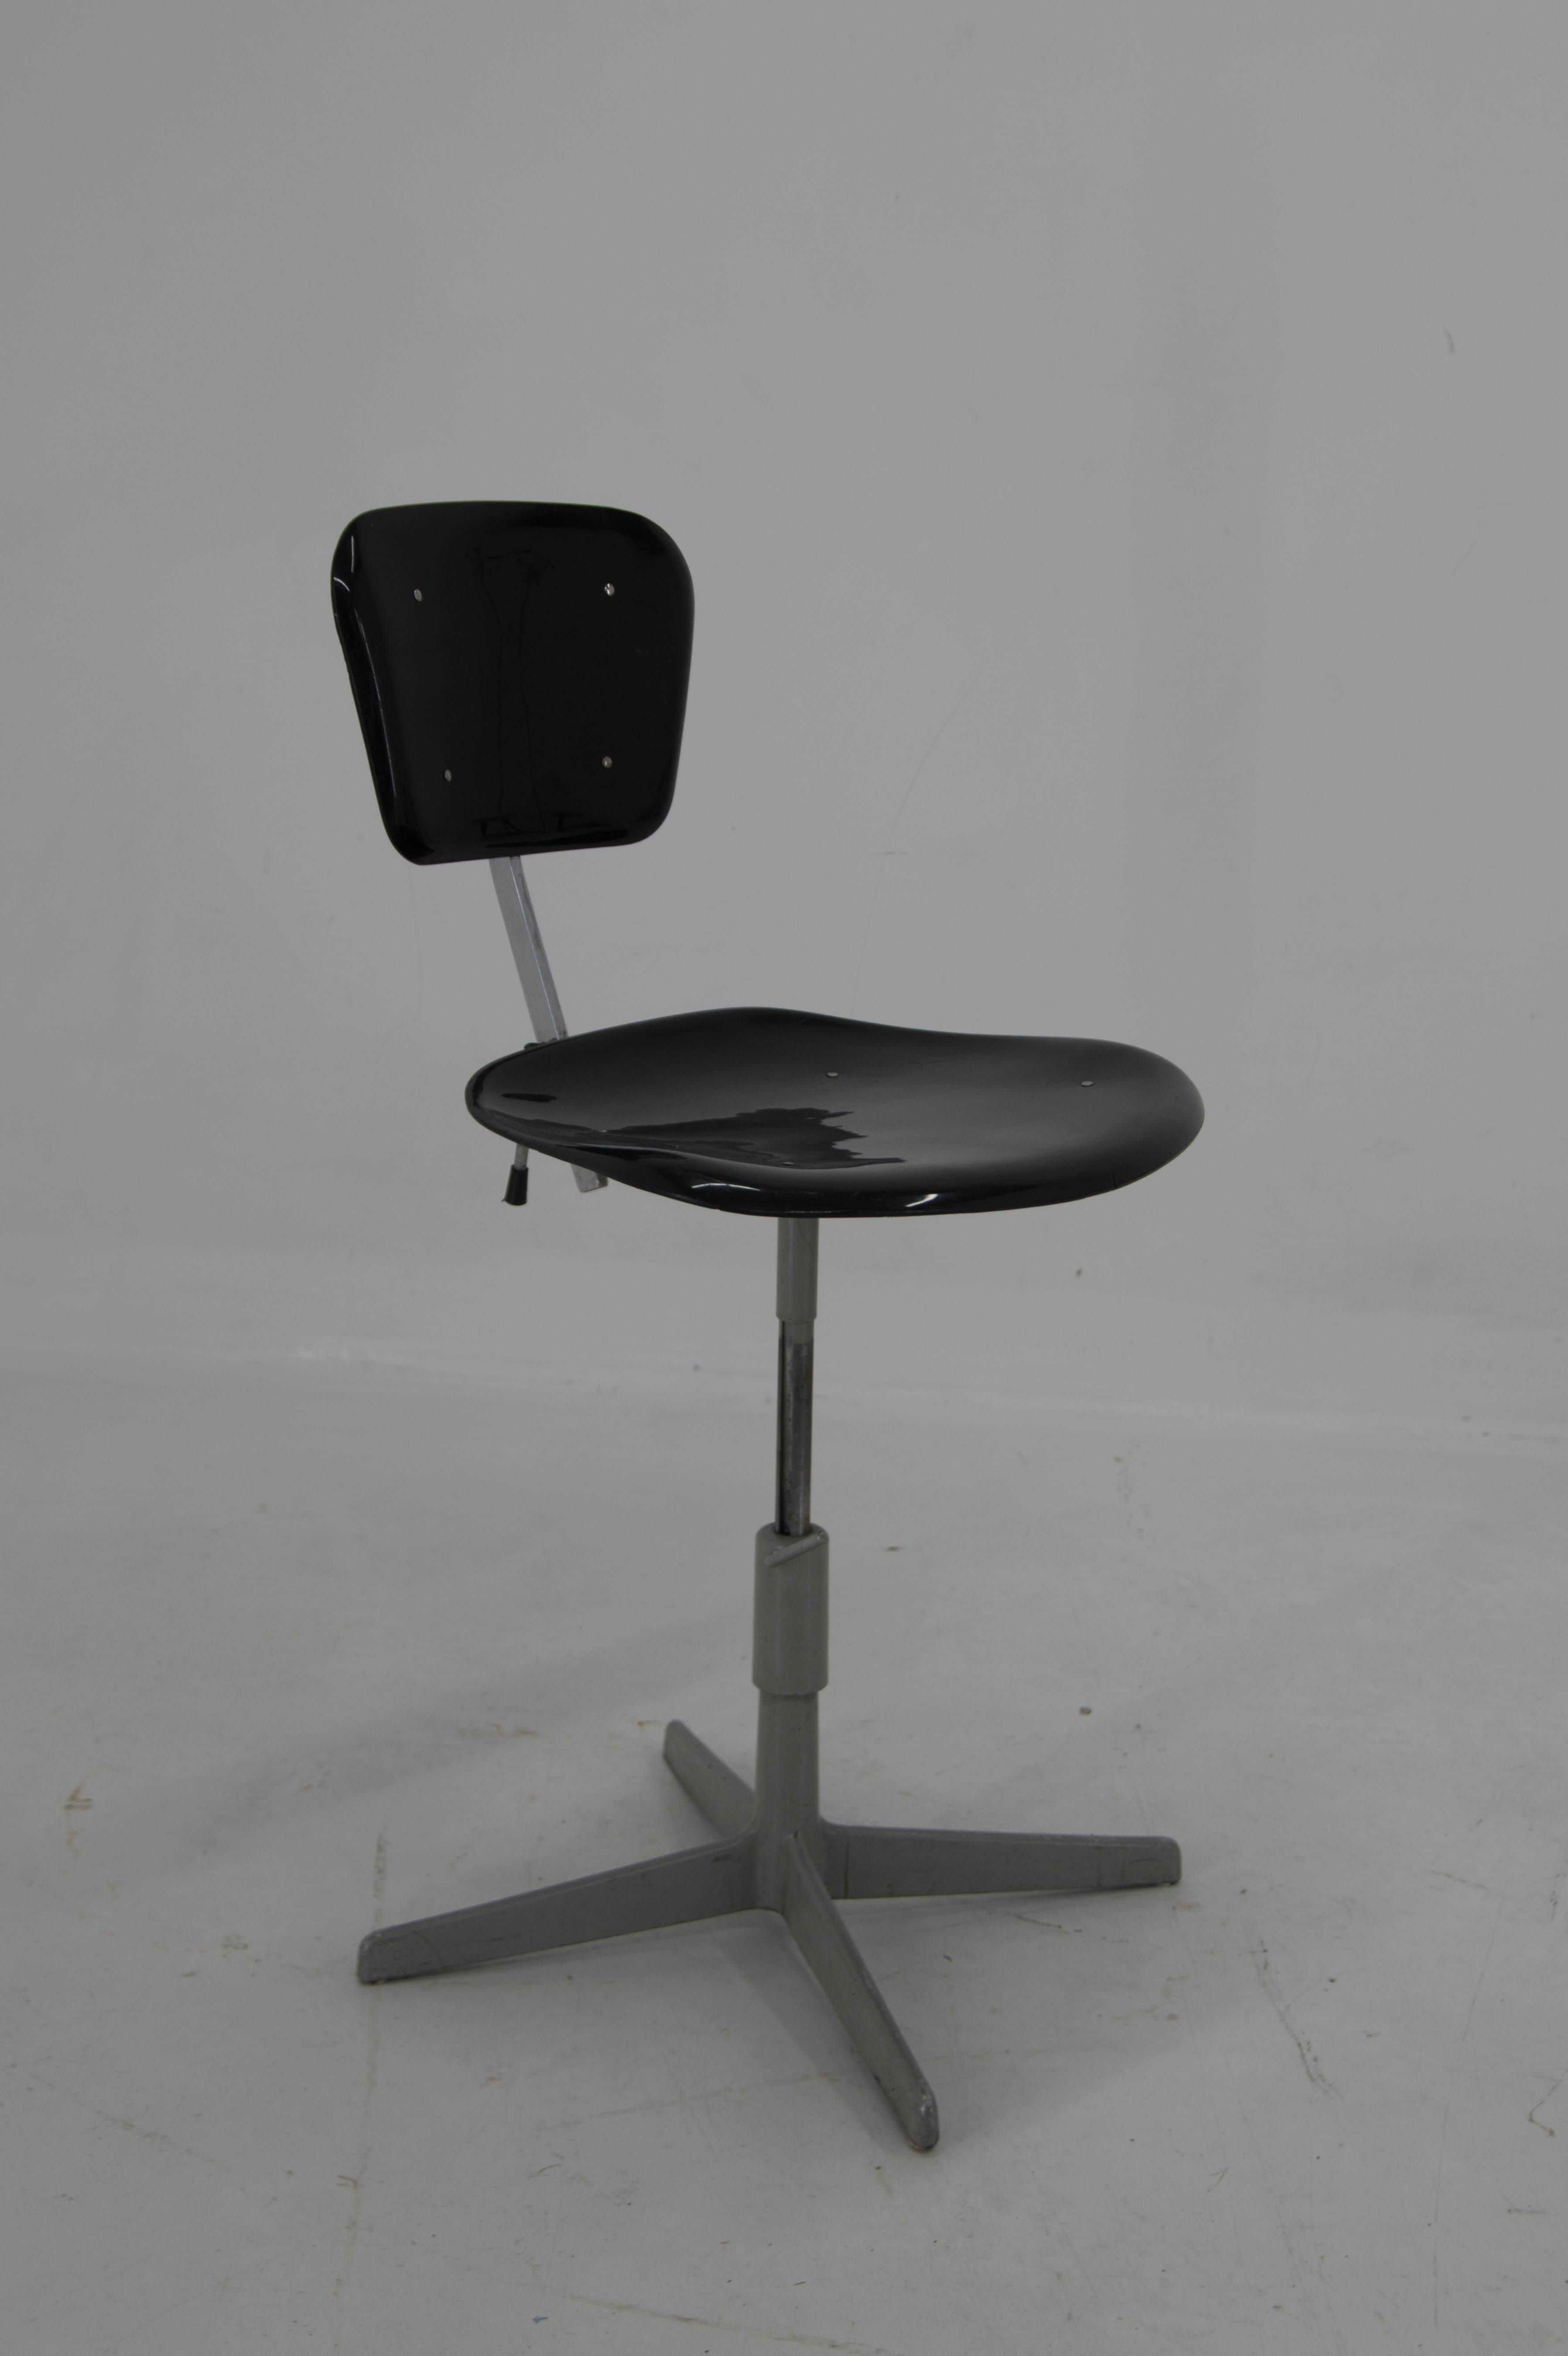 Working or office chair made in 1960s
Adjustable seat height and backrest angle.
Very good original condition, plastic with some scratches.
Measure: Seat height: 41cm-56cm.